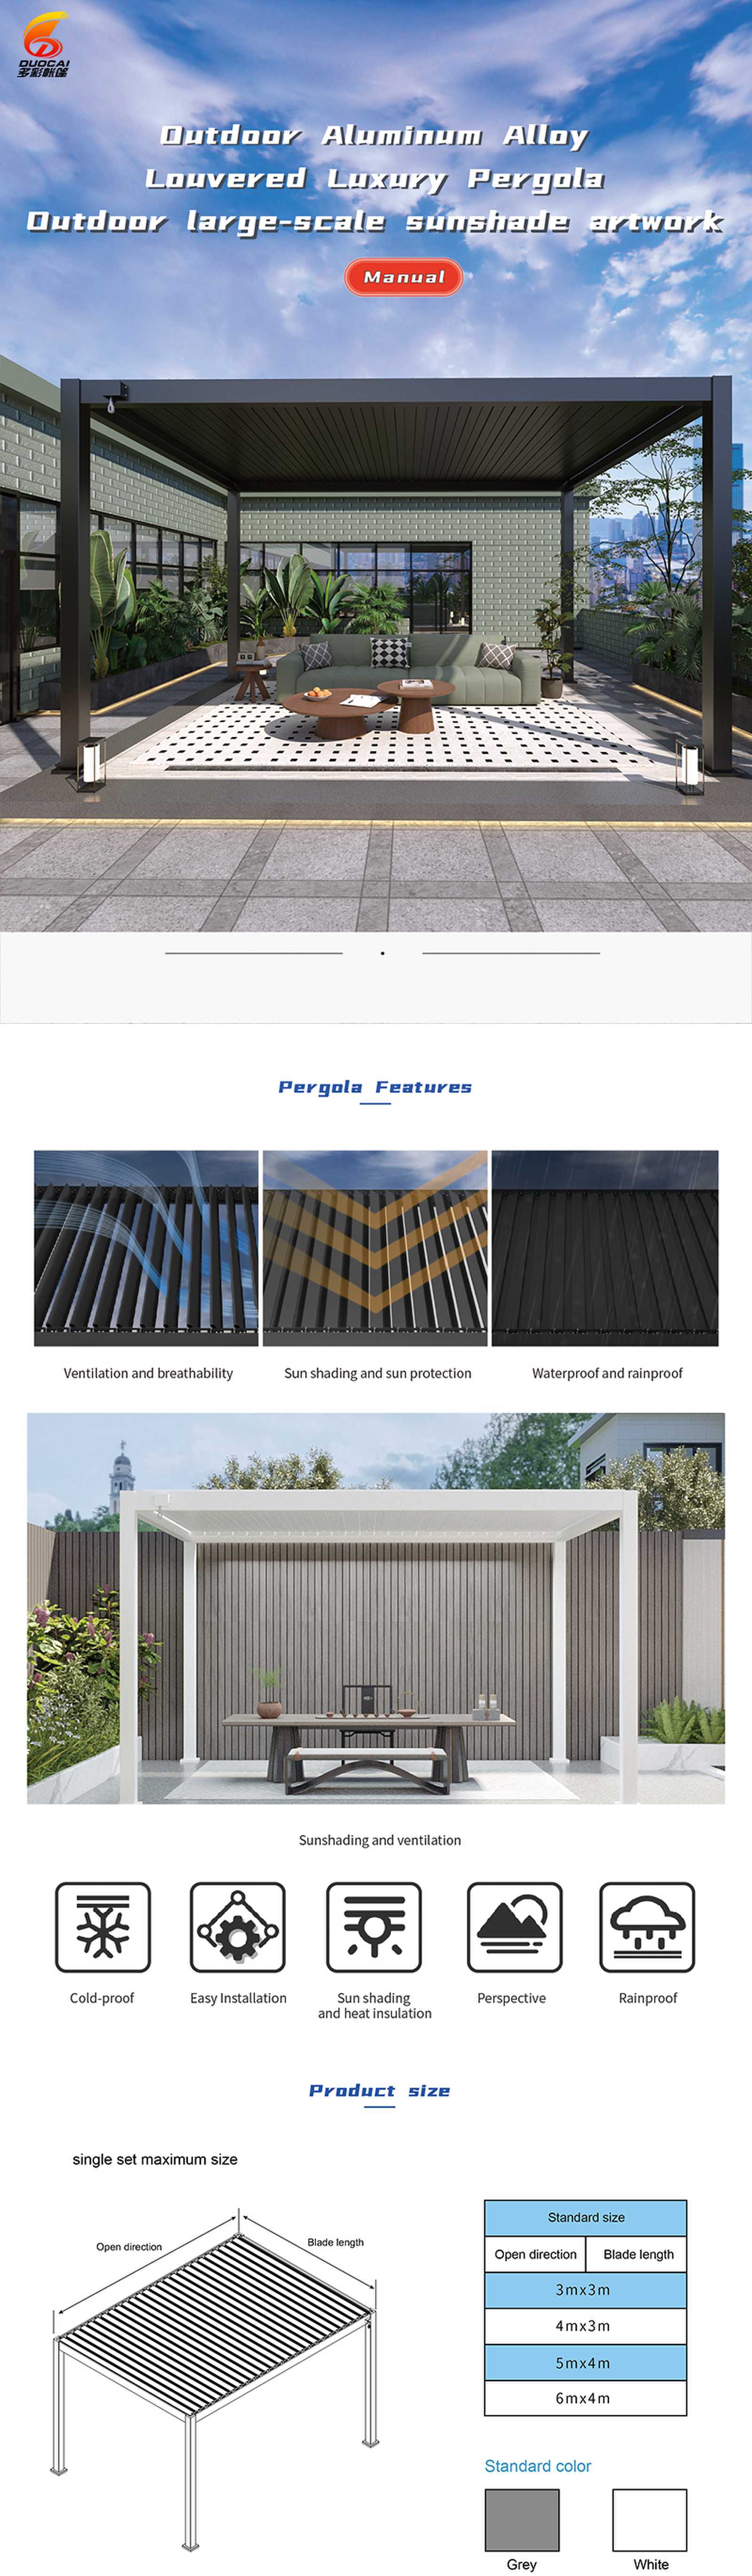 Perspective aluminum Louvered Pergolas  with Adjustable Roof